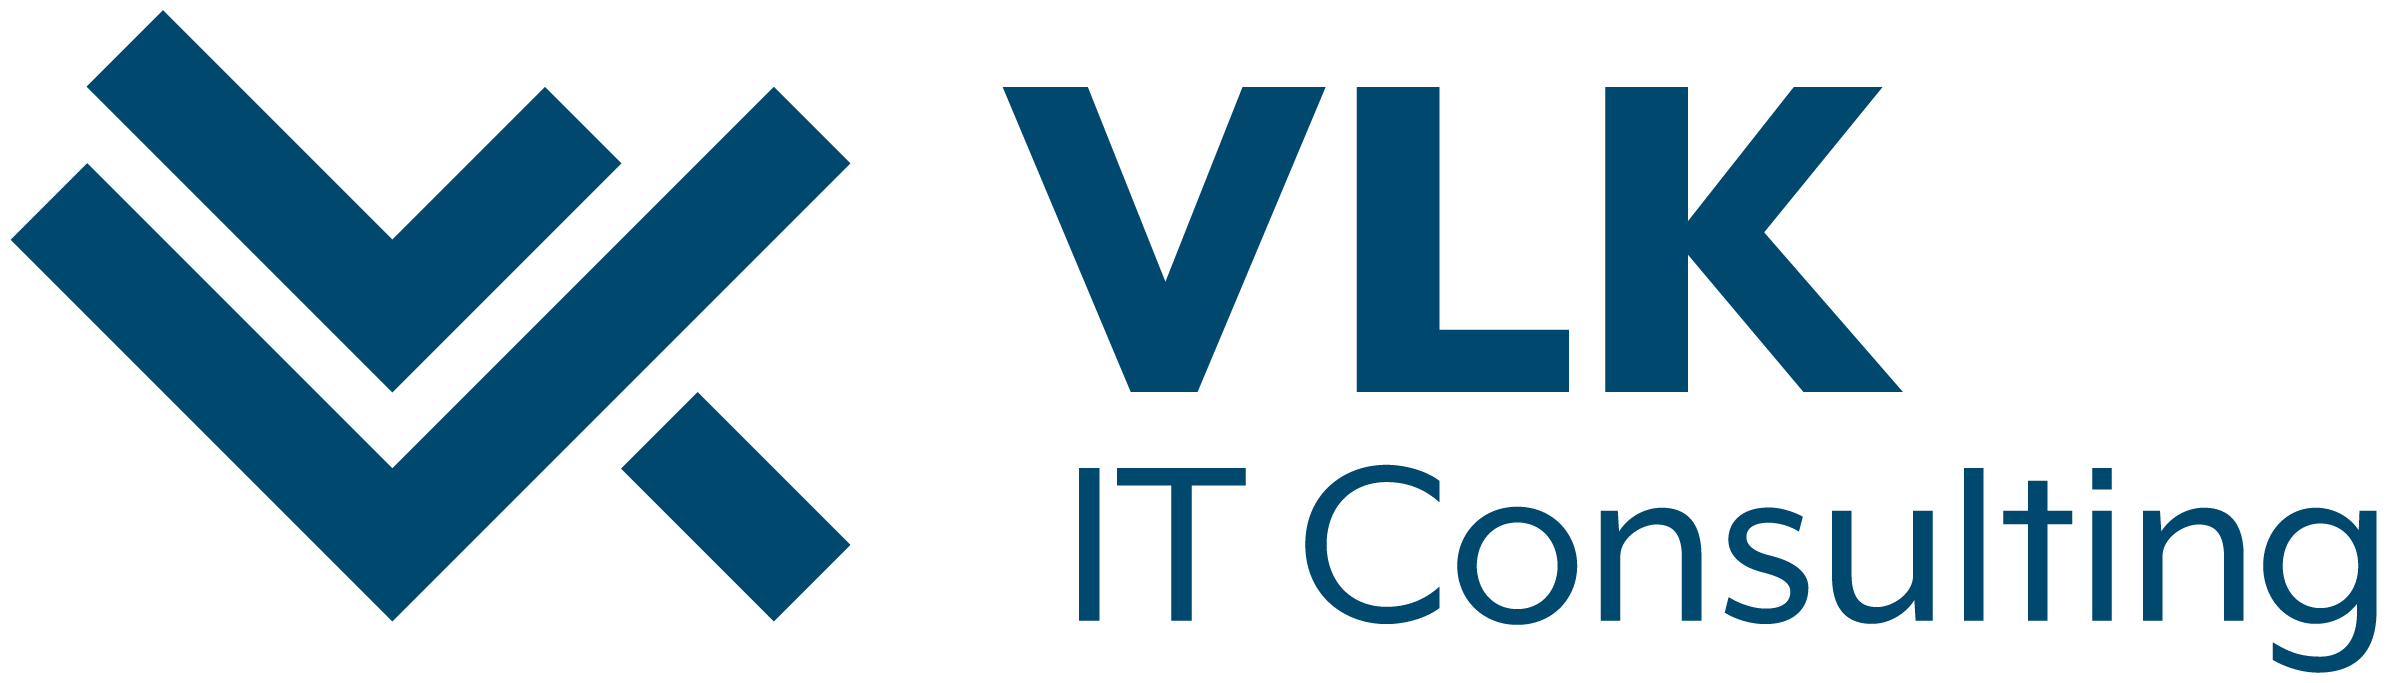 Vlk IT Consulting ApS